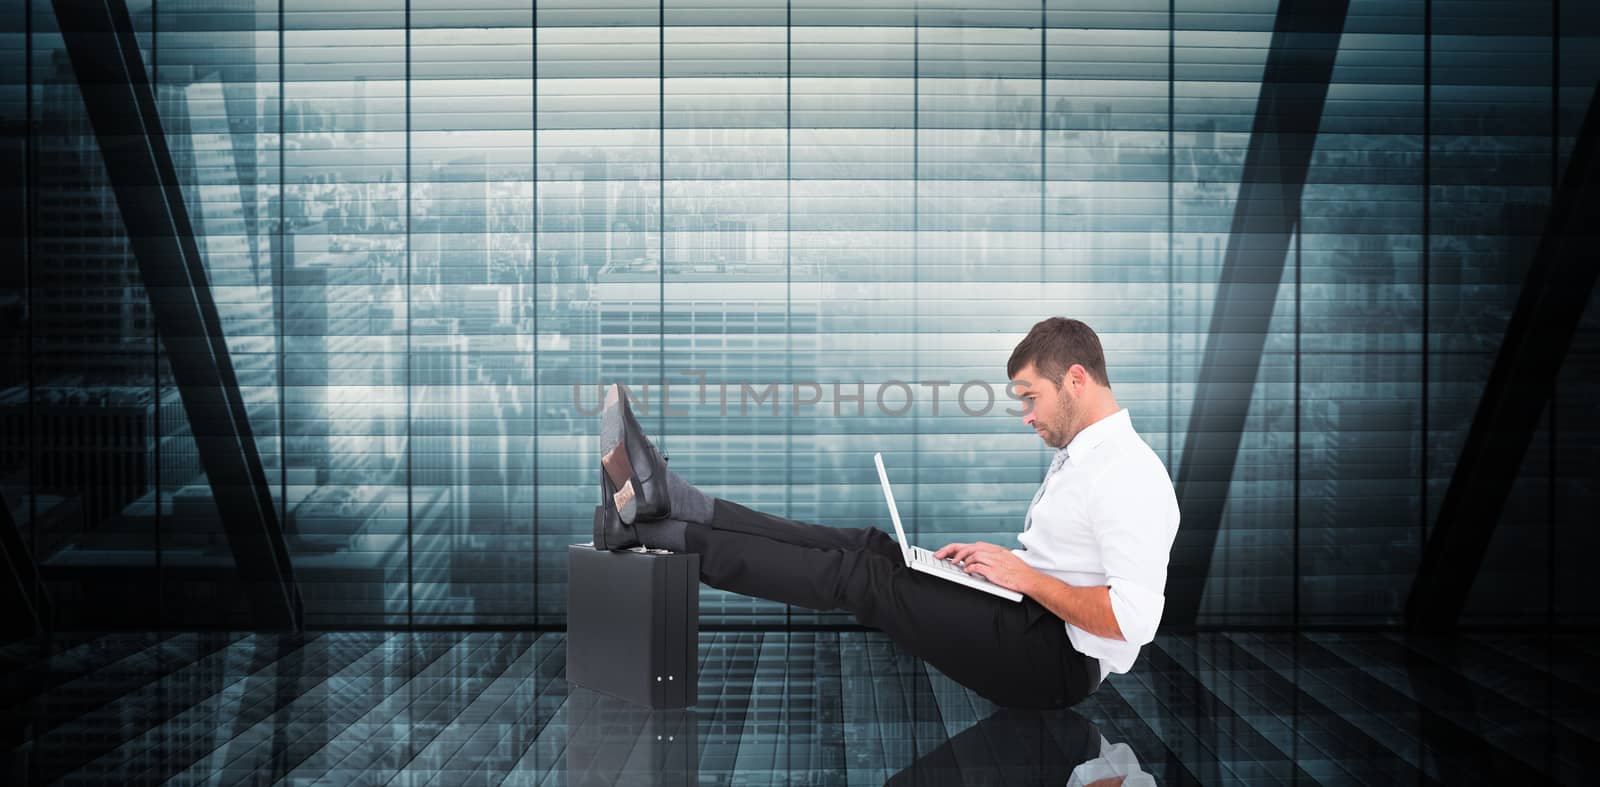 Businessman with feet up on briefcase against room with large window looking on city